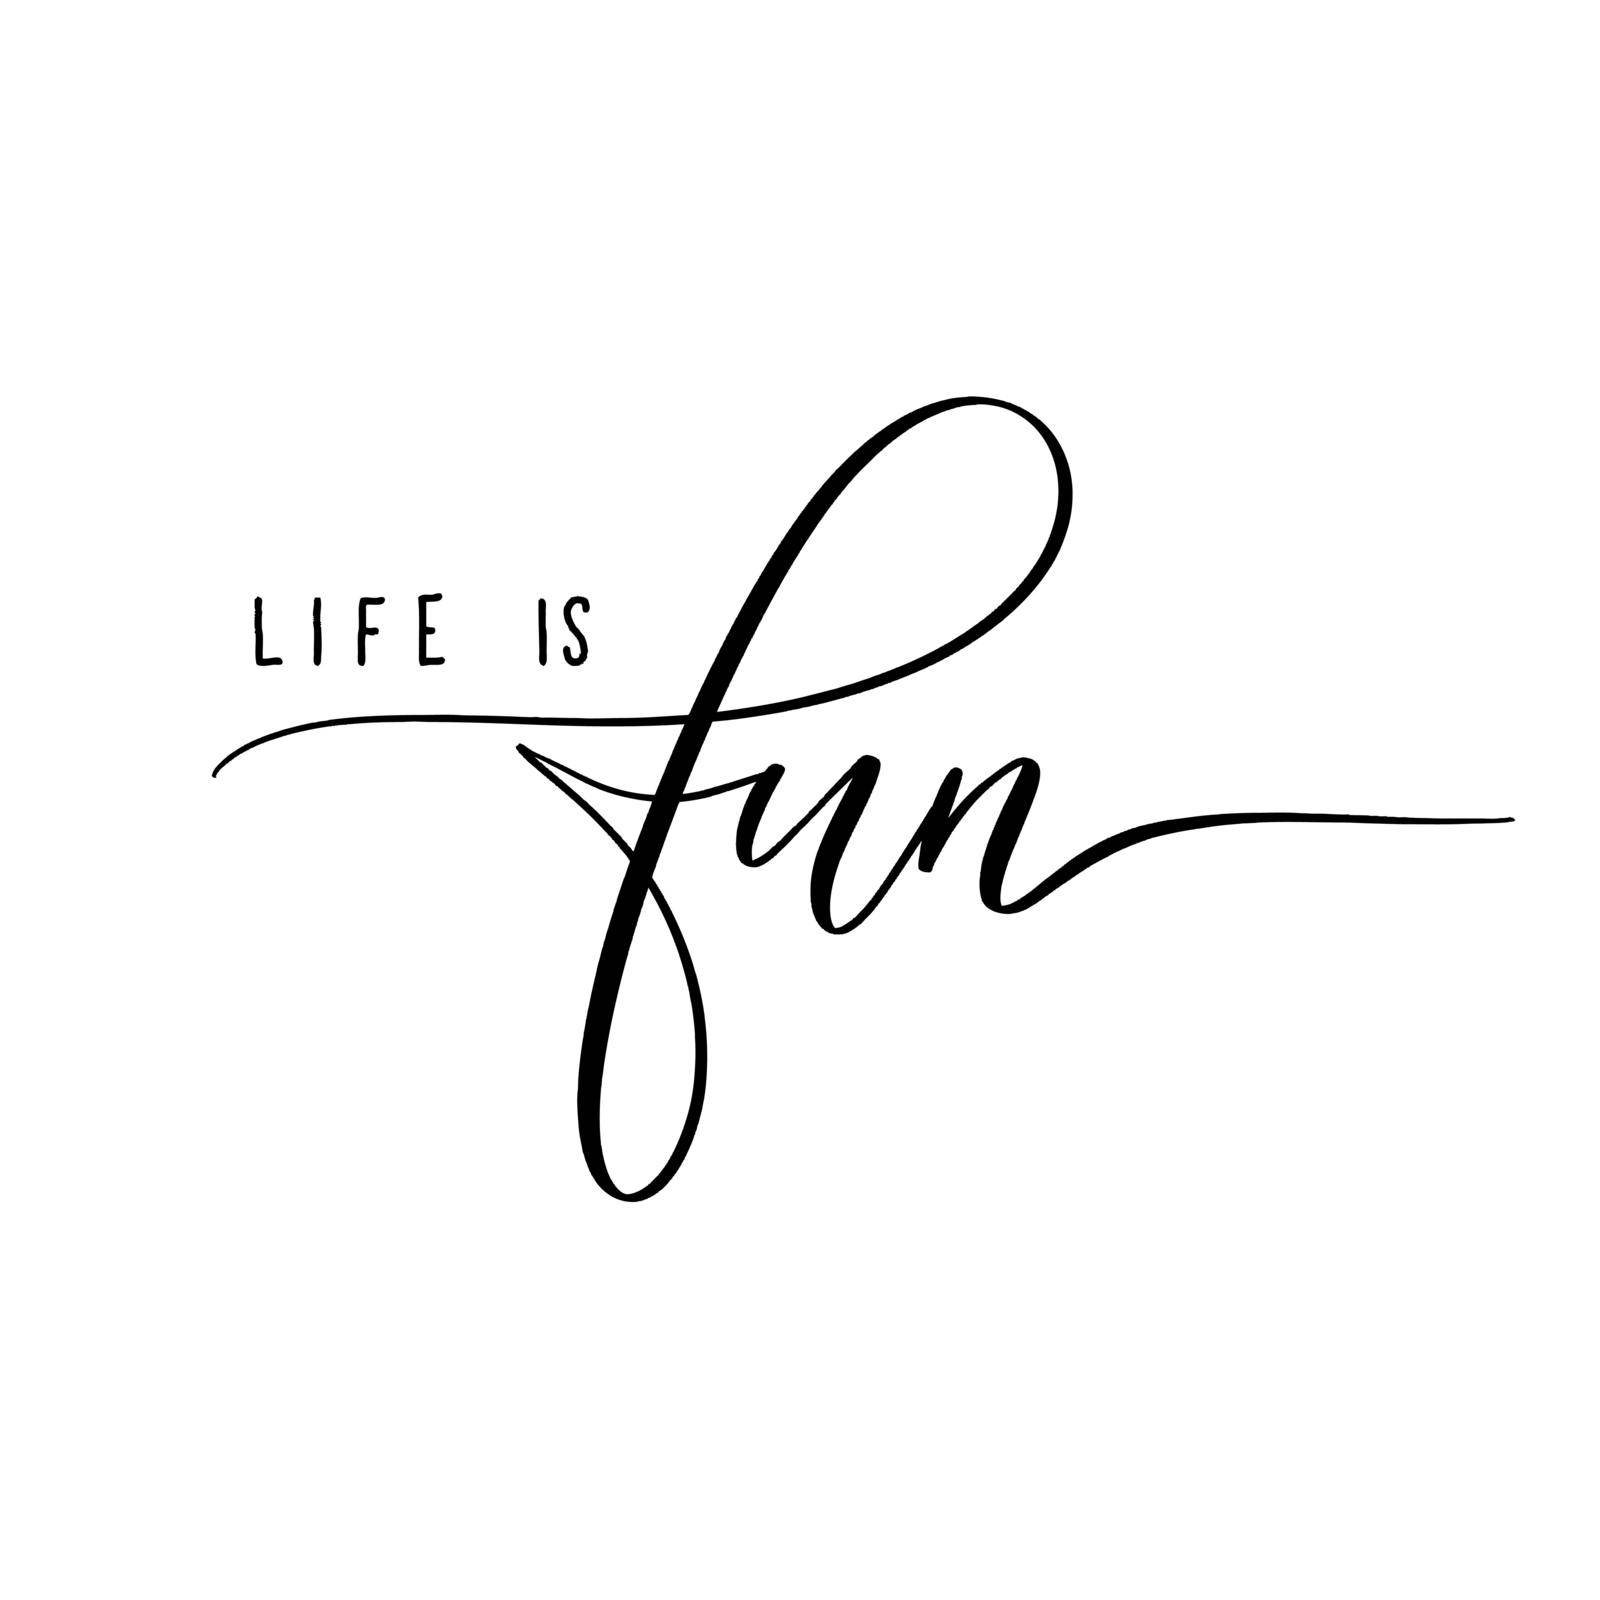 Life is fun - lettering inscription